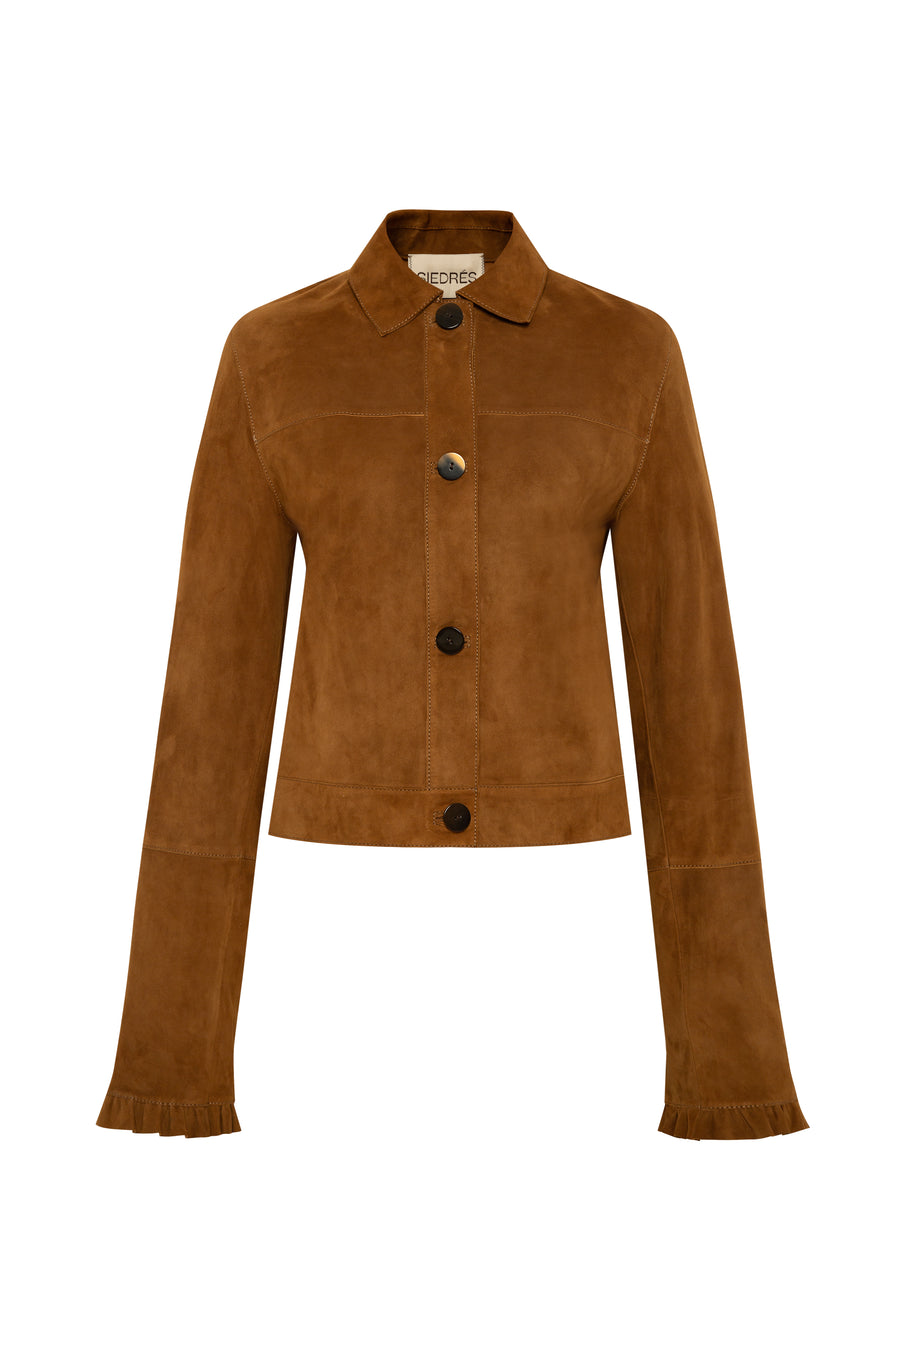 ARIL - Frill detailed suede jacket